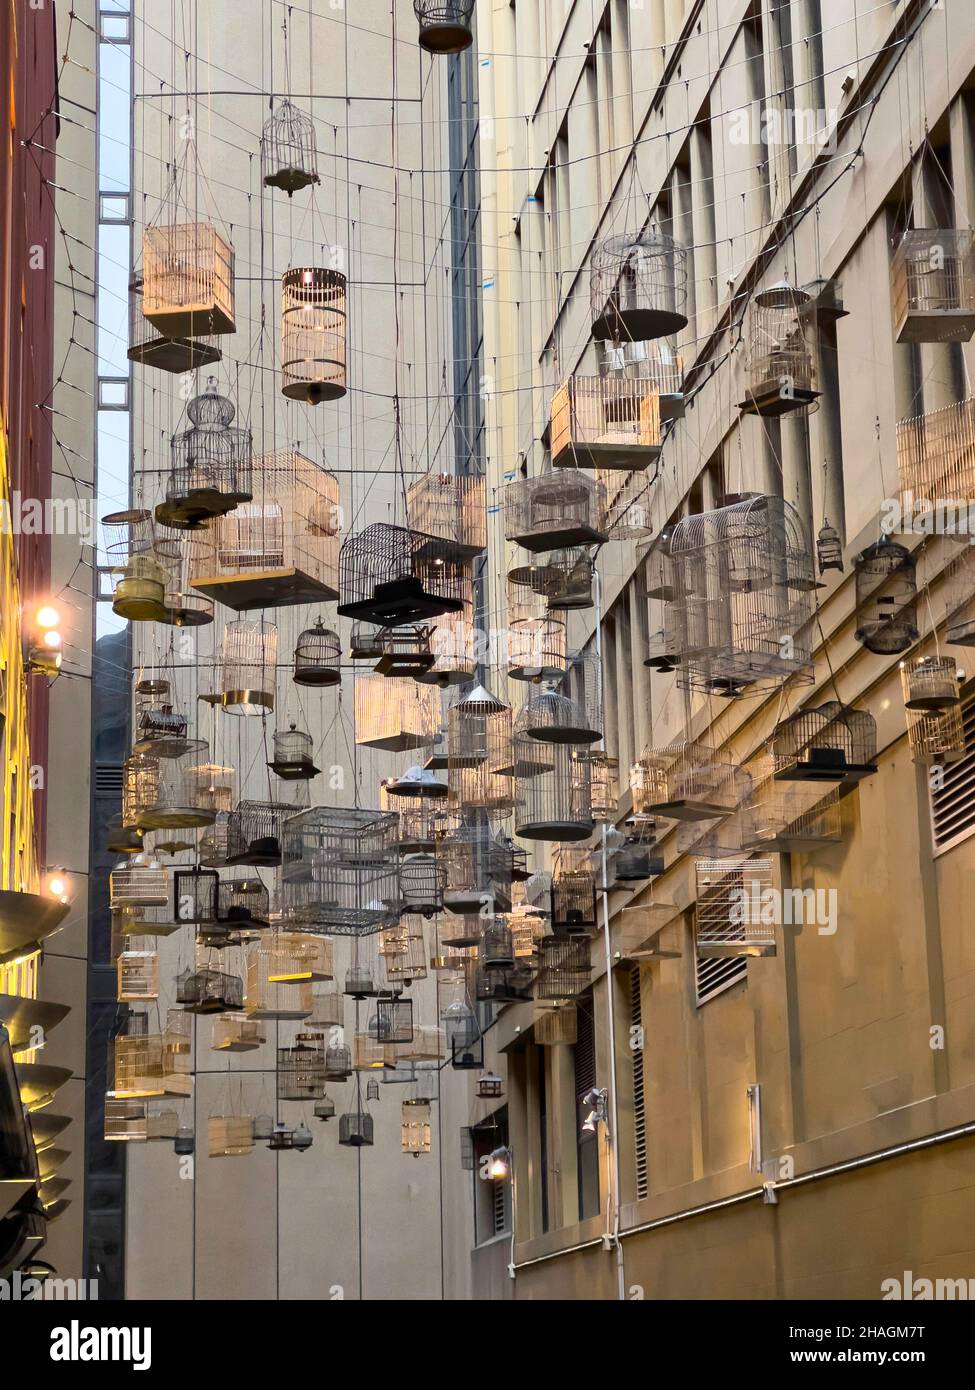 Forgotten Songs is an artistic installation of empty birdcages hanging in the sky on the angle of Place lane way, Sydney NSW Australia Stock Photo